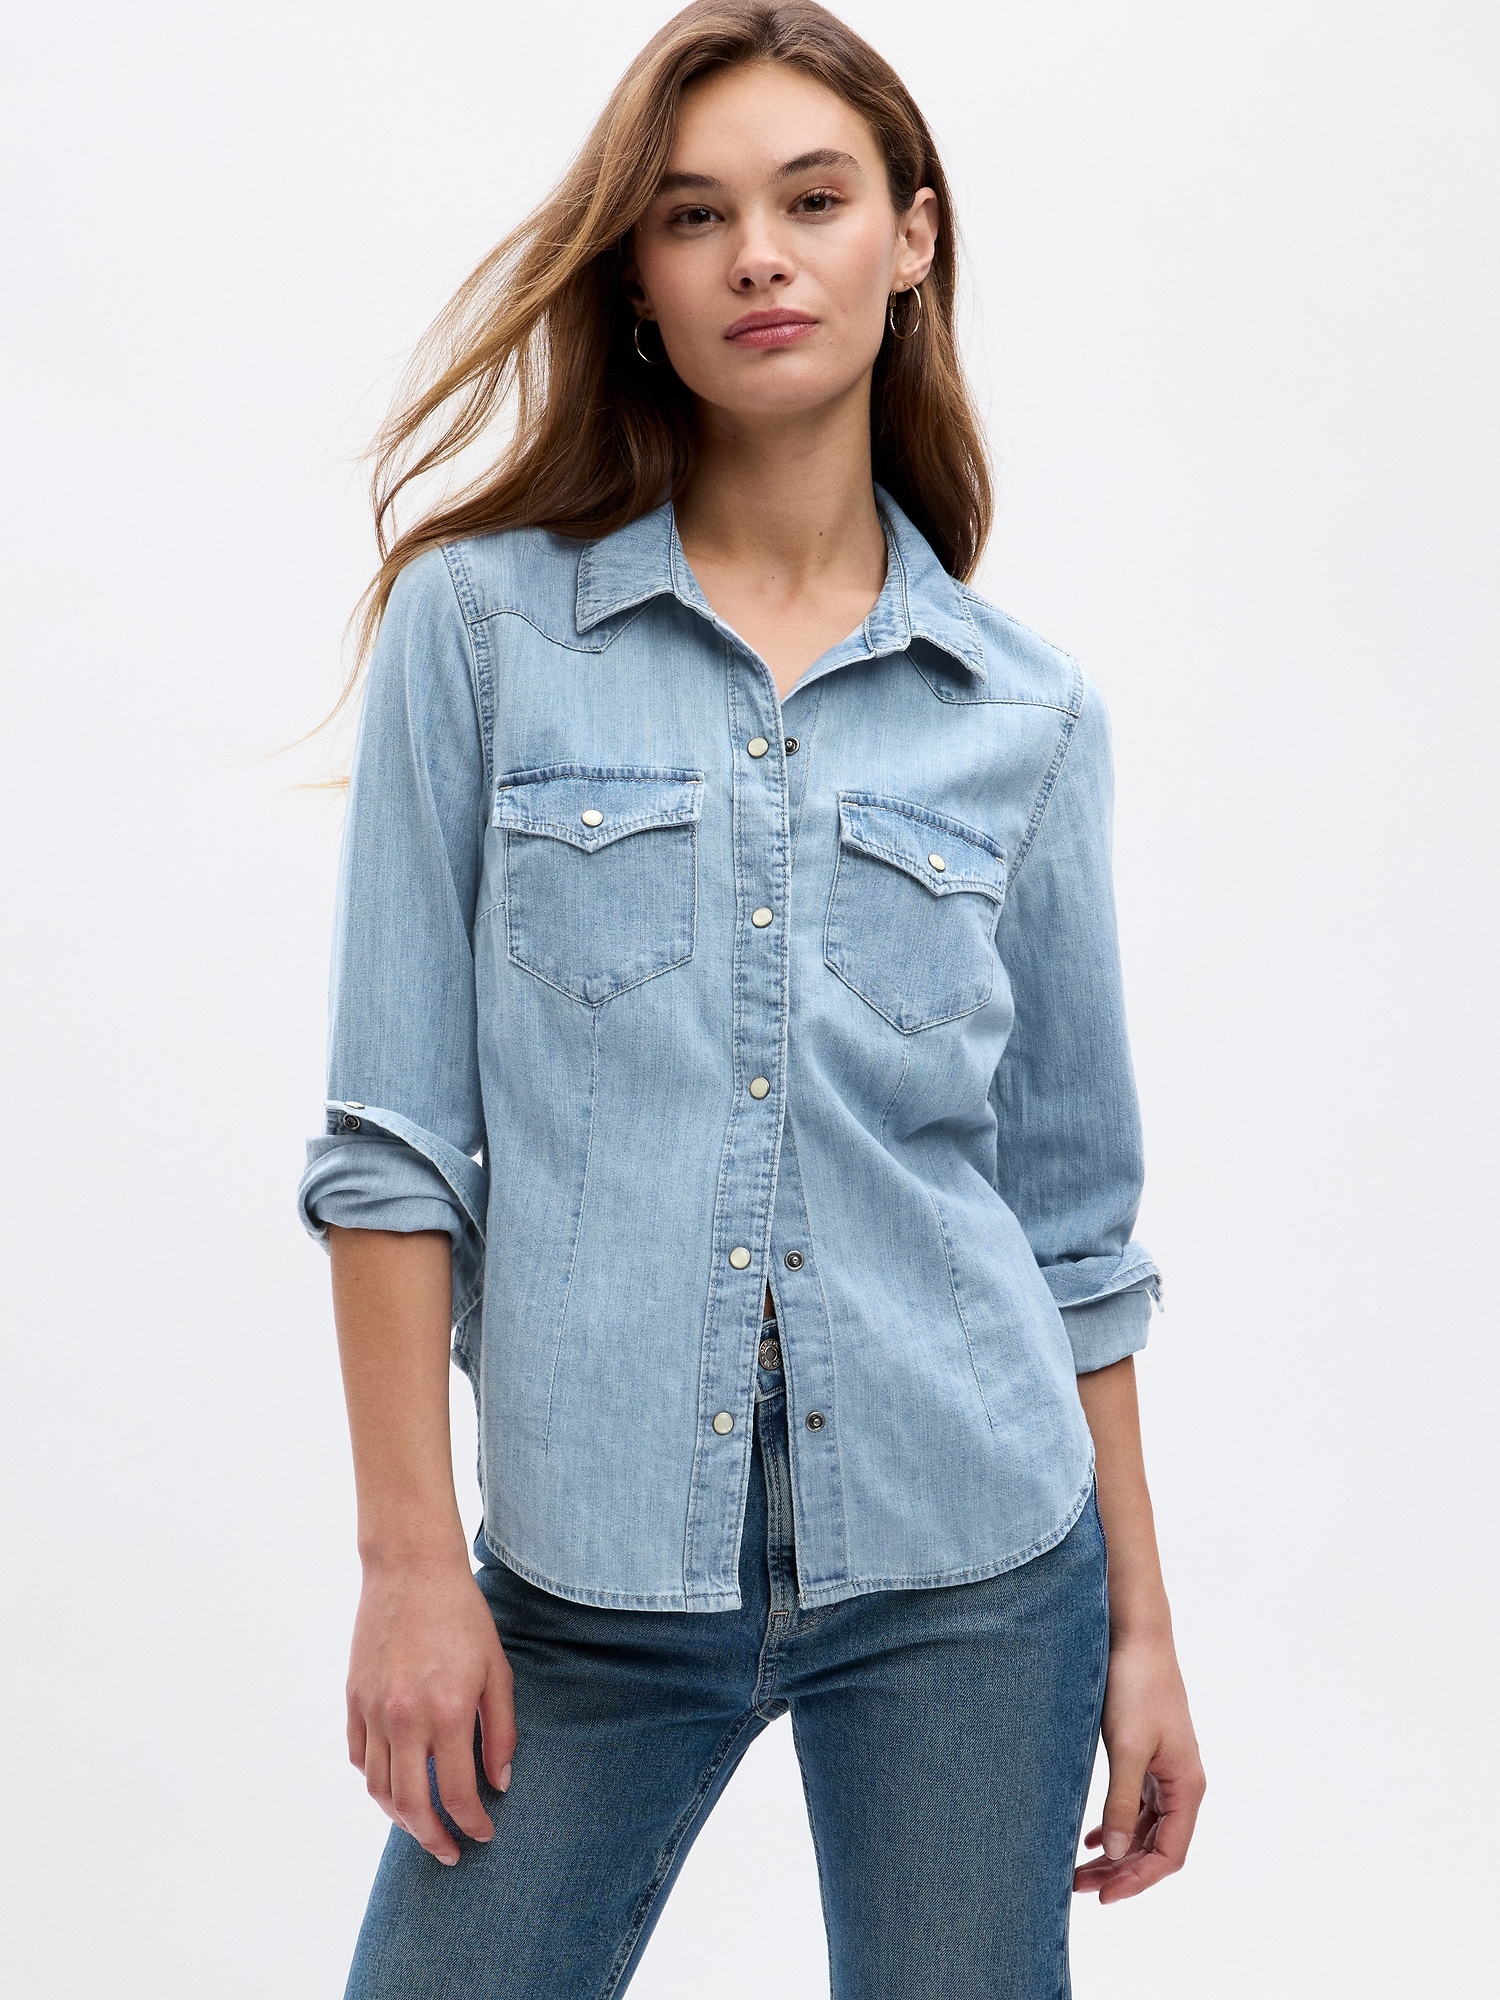 Fitted Denim Western Shirt with Washwell | Gap Factory